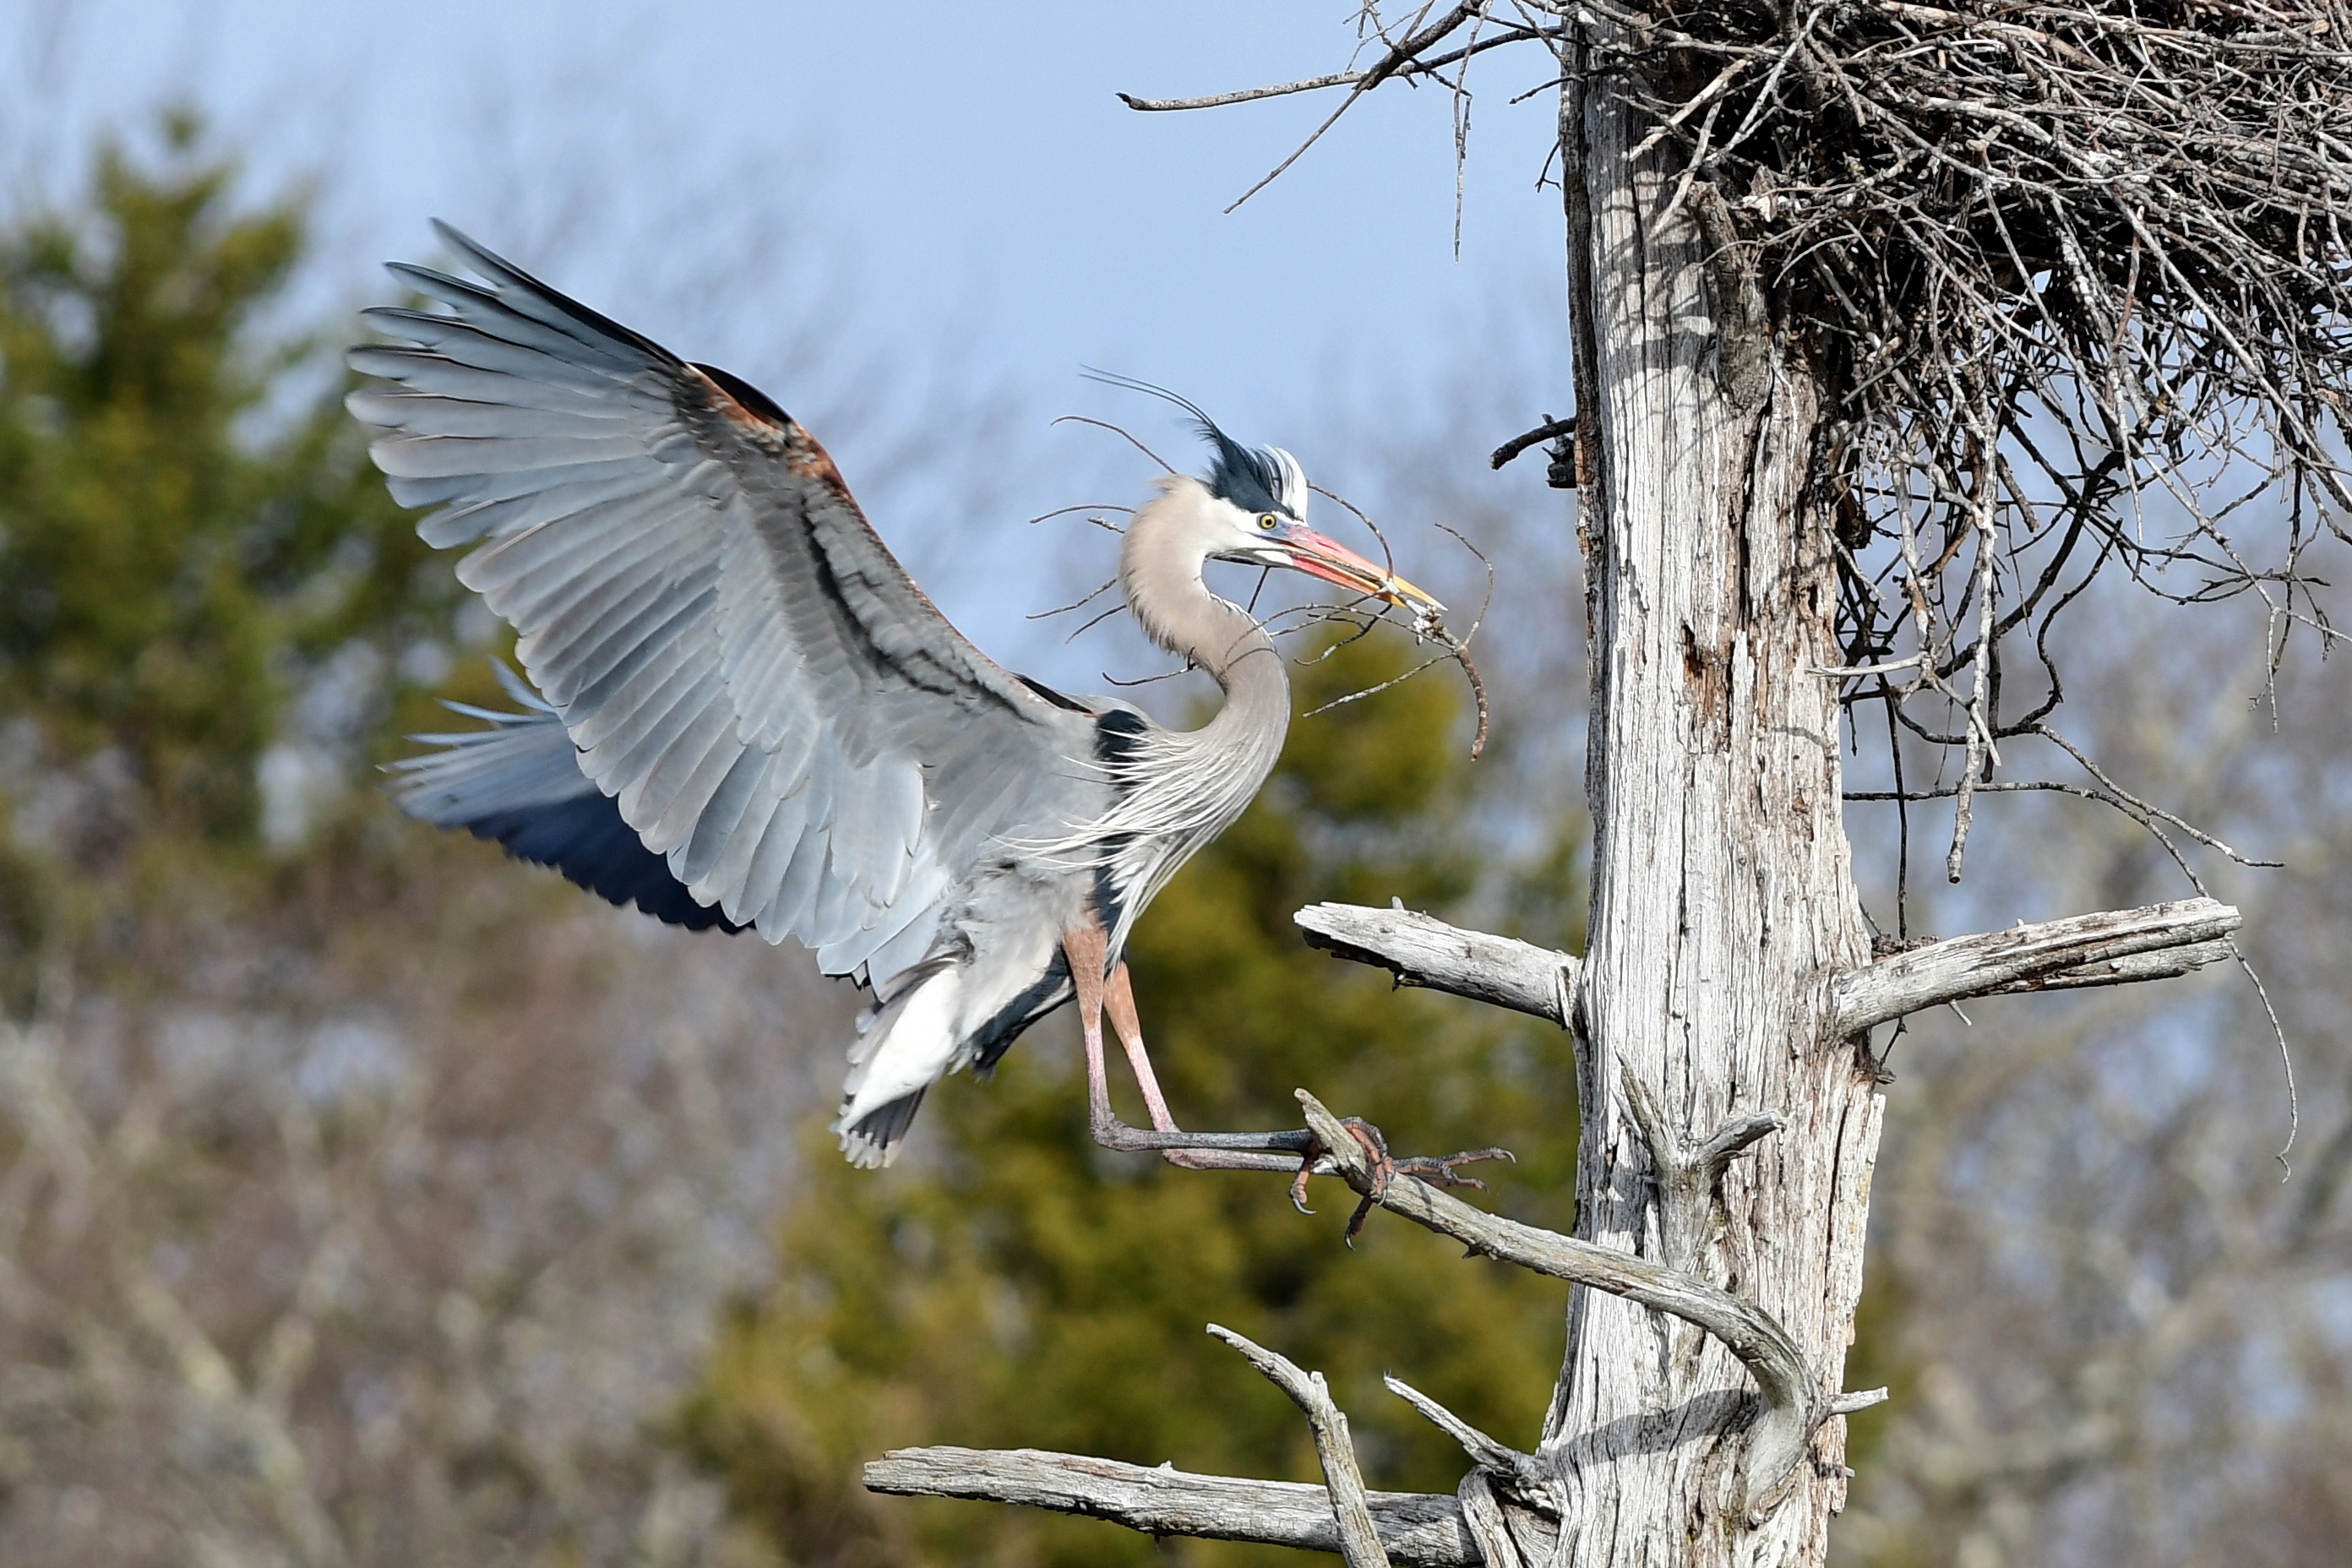 In early April 2022, a great blue heron brings in a stick to spruce up its old nest. Photo by Sherrie Tucker.